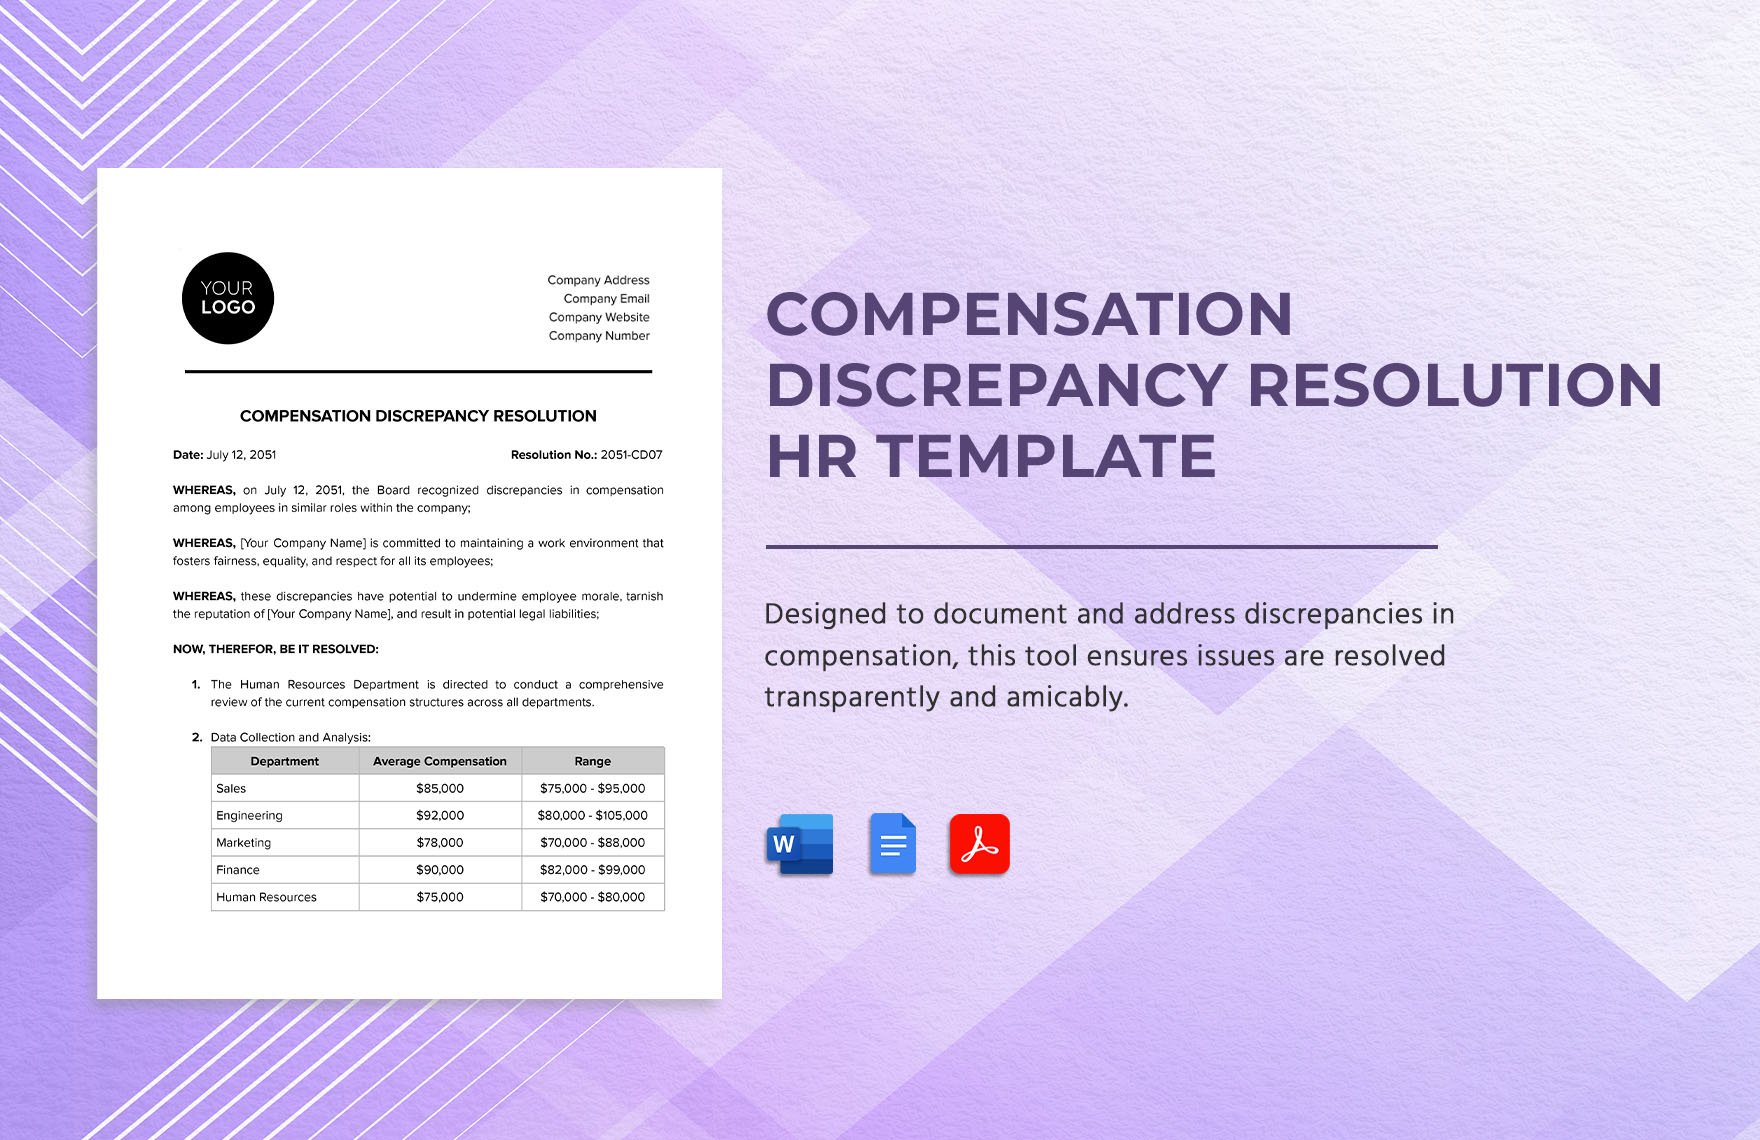 Compensation Discrepancy Resolution HR Template in Word, Google Docs, PDF